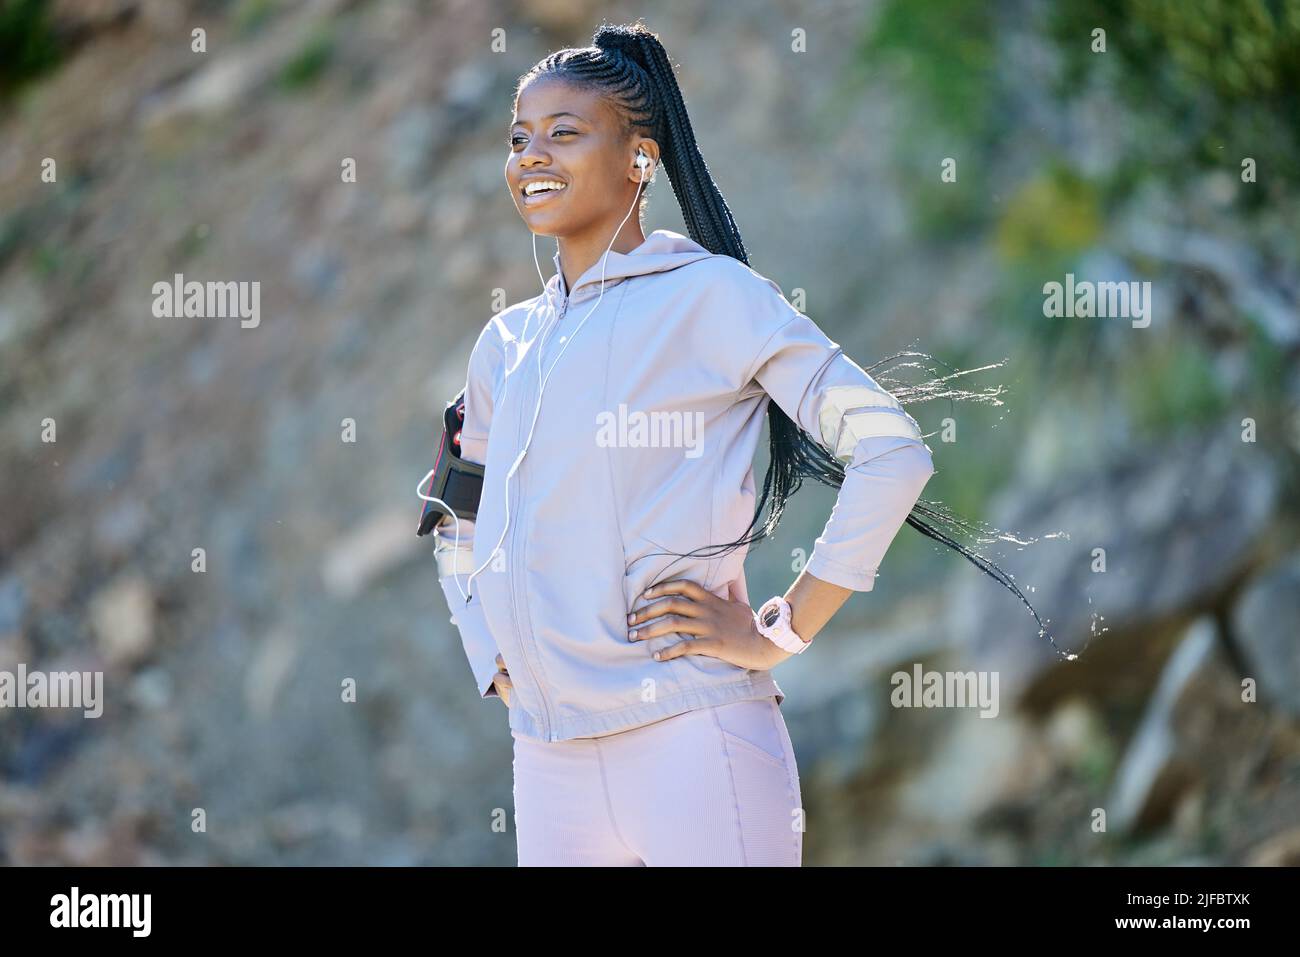 Young happy african american woman hiking on a mountain, taking a break to rest. Black ethnic fit smiling young woman working out in nature. Athletic Stock Photo